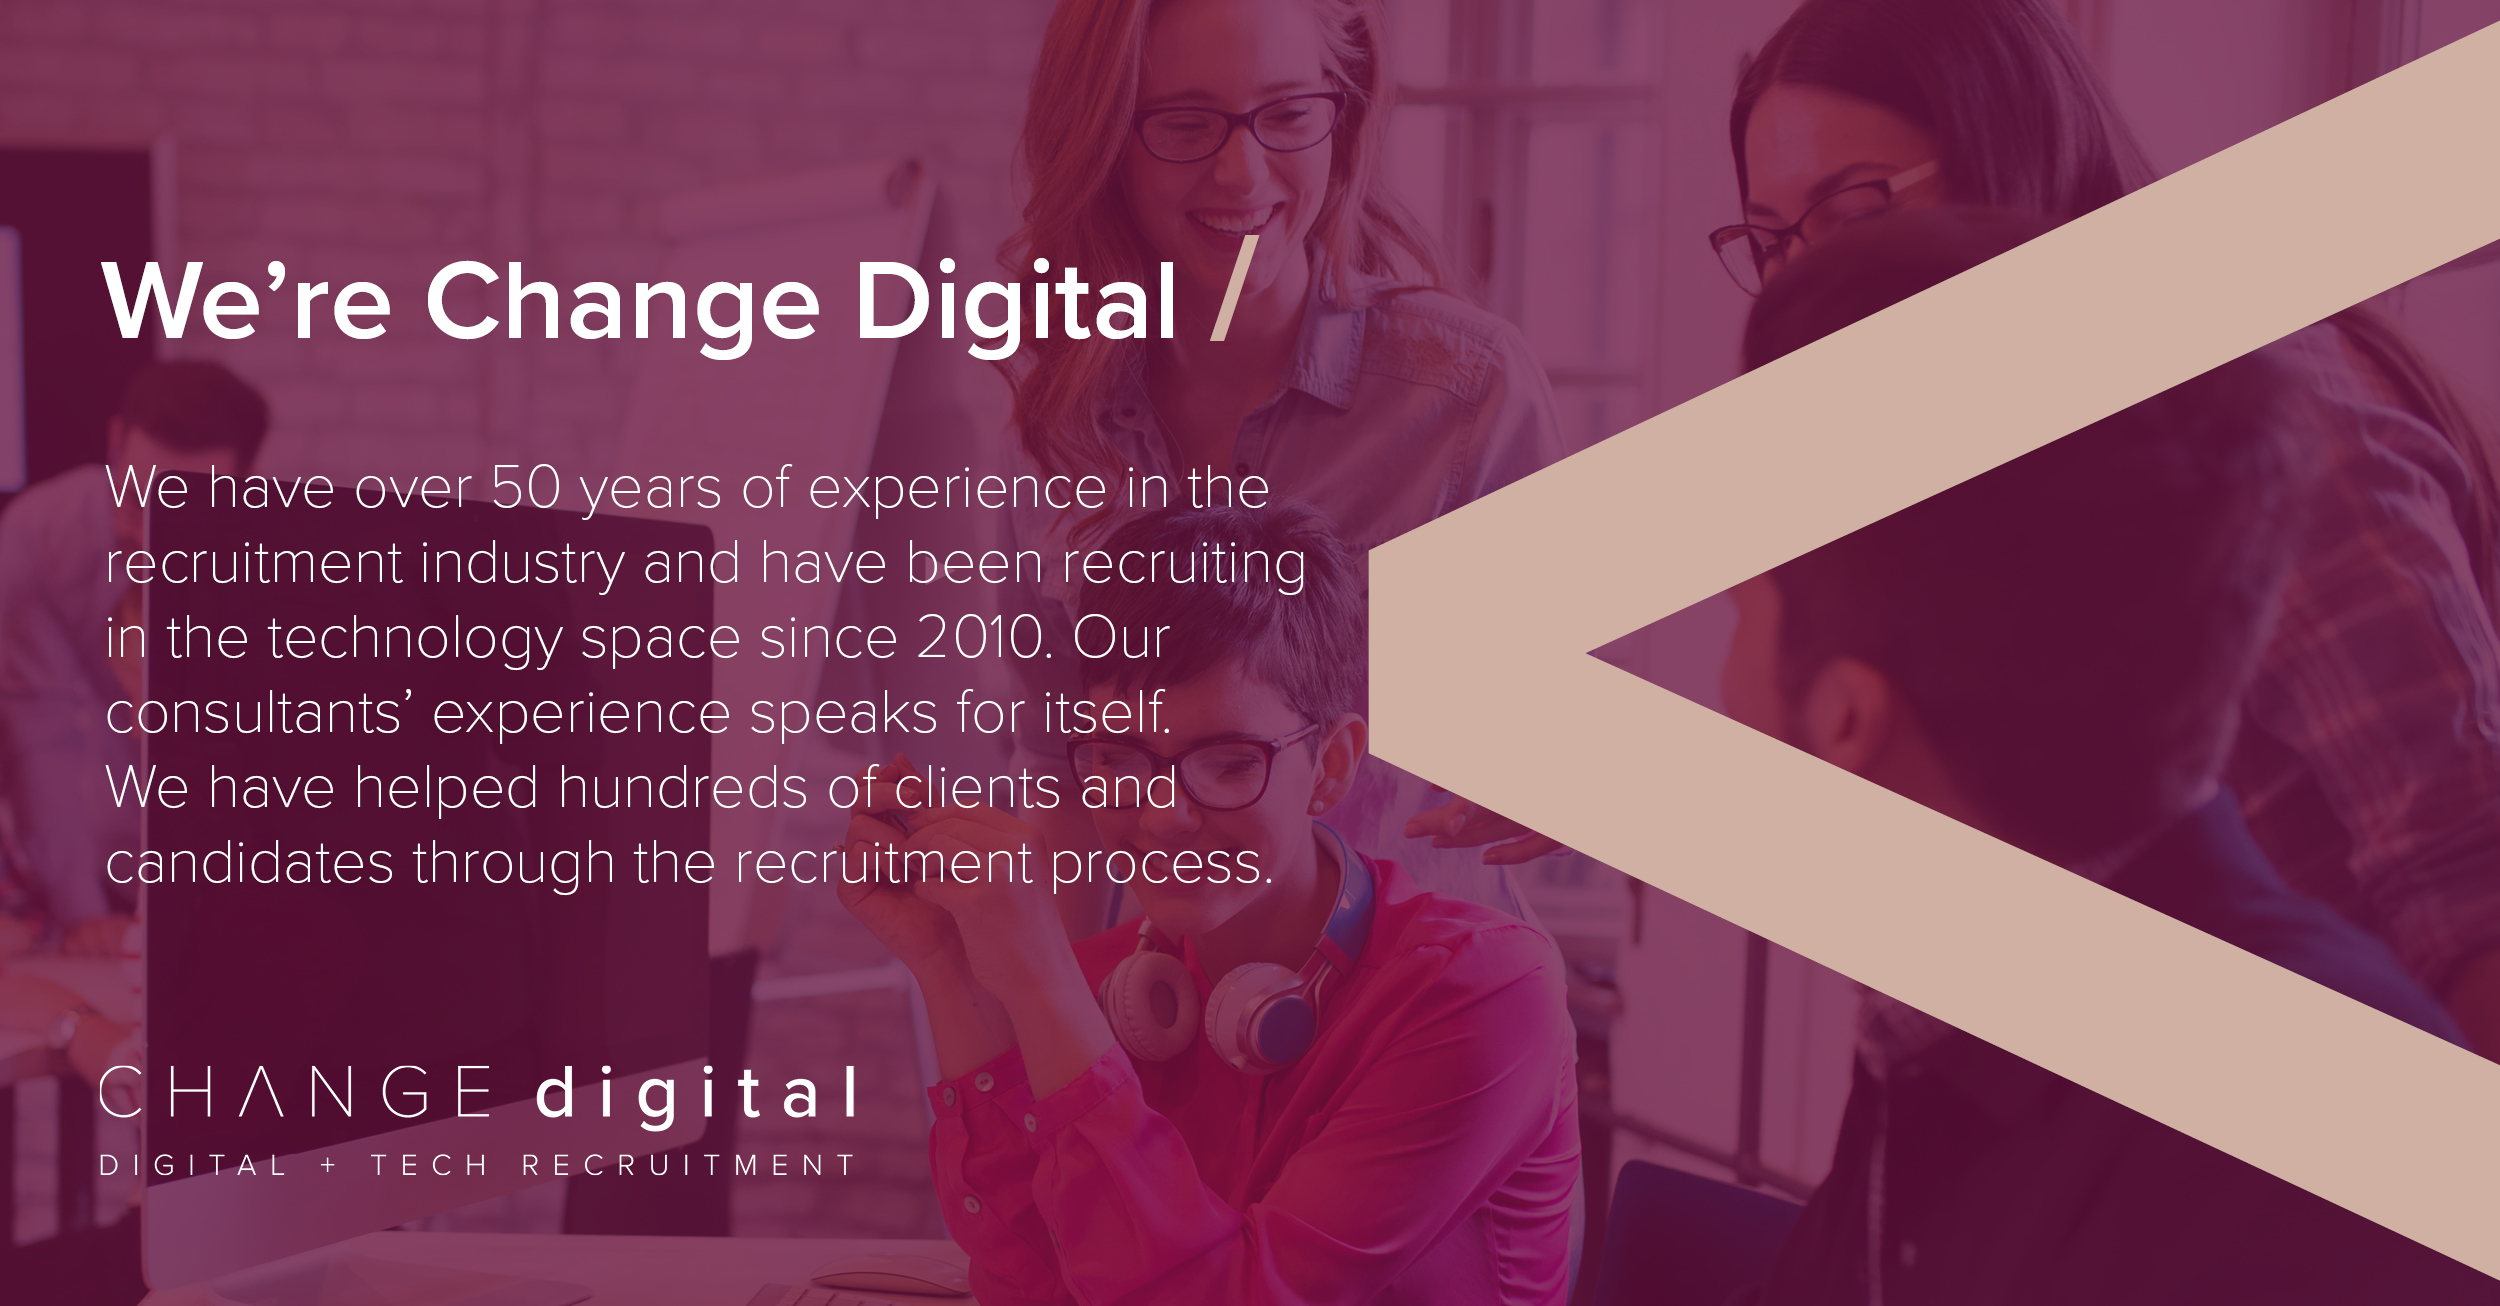 We're Change Digital with over 50 years experience